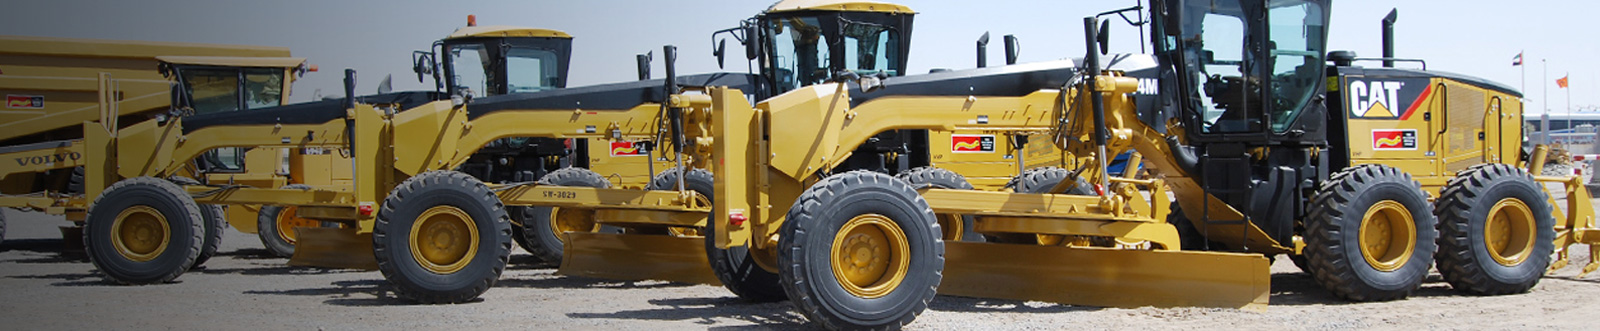 Used heavy equipment services - Southwest Global